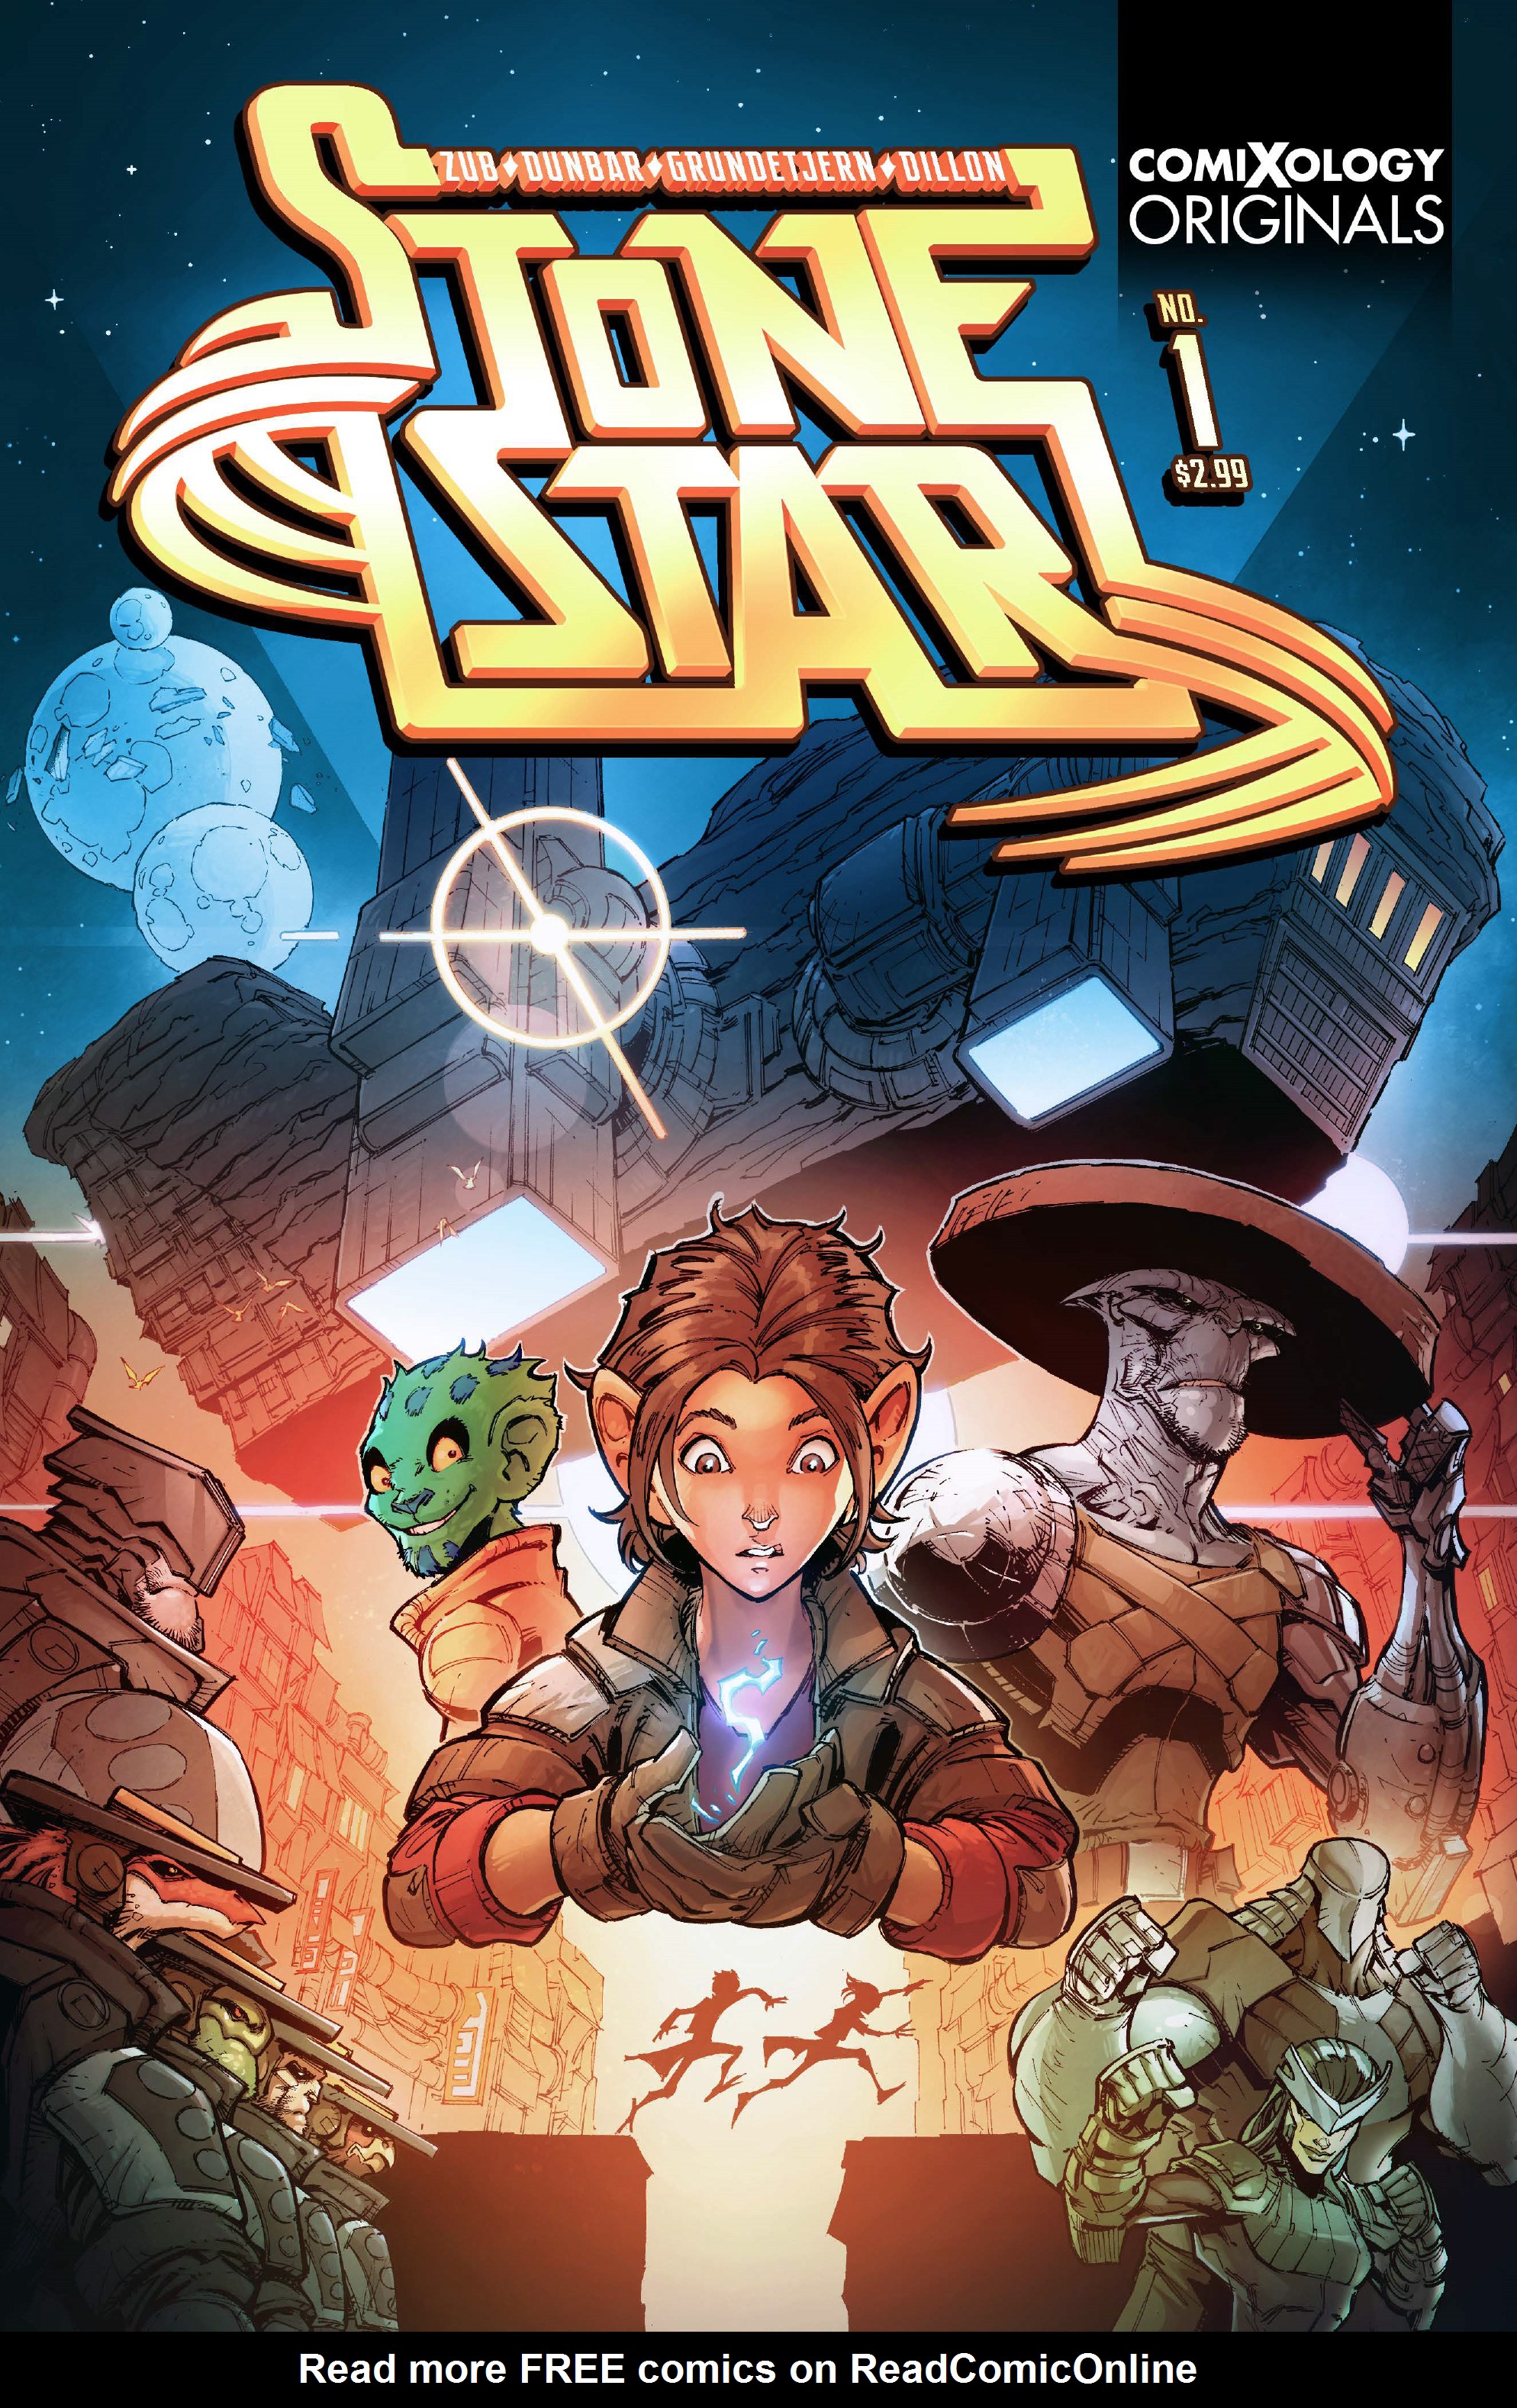 Read online Stone Star comic -  Issue #1 - 1